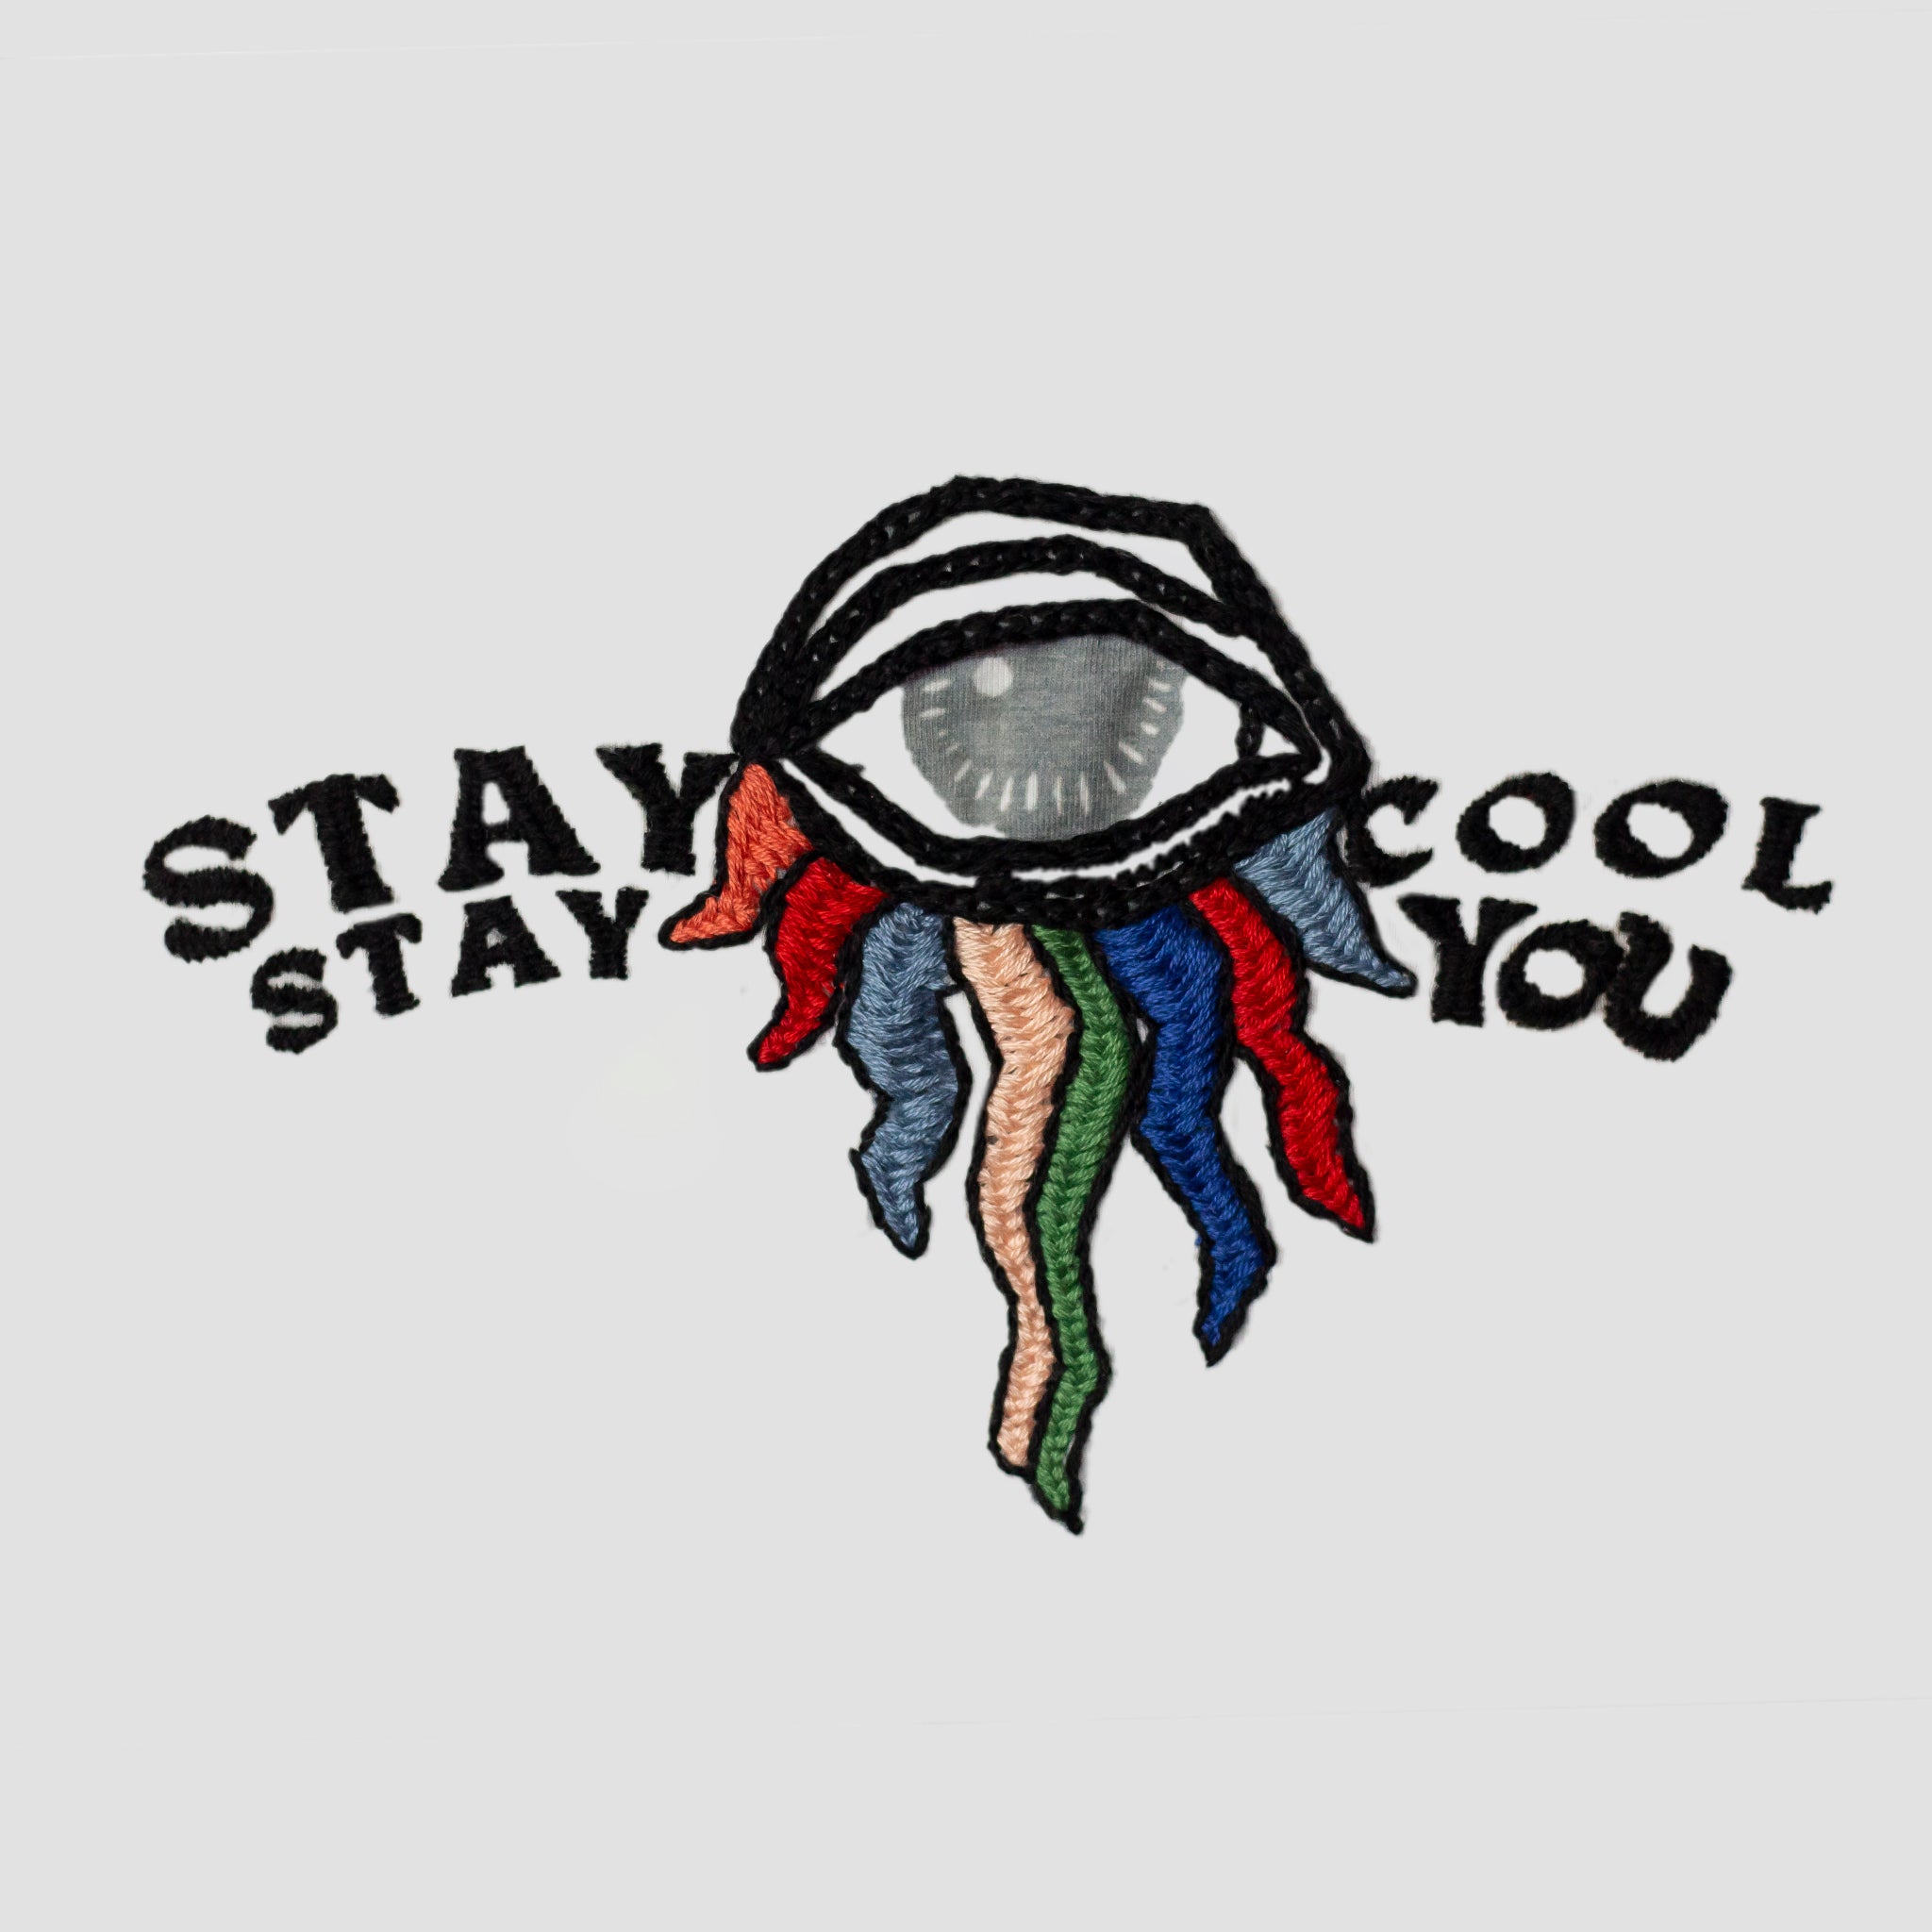 REGULAR FIT "Stay cool, stay you"